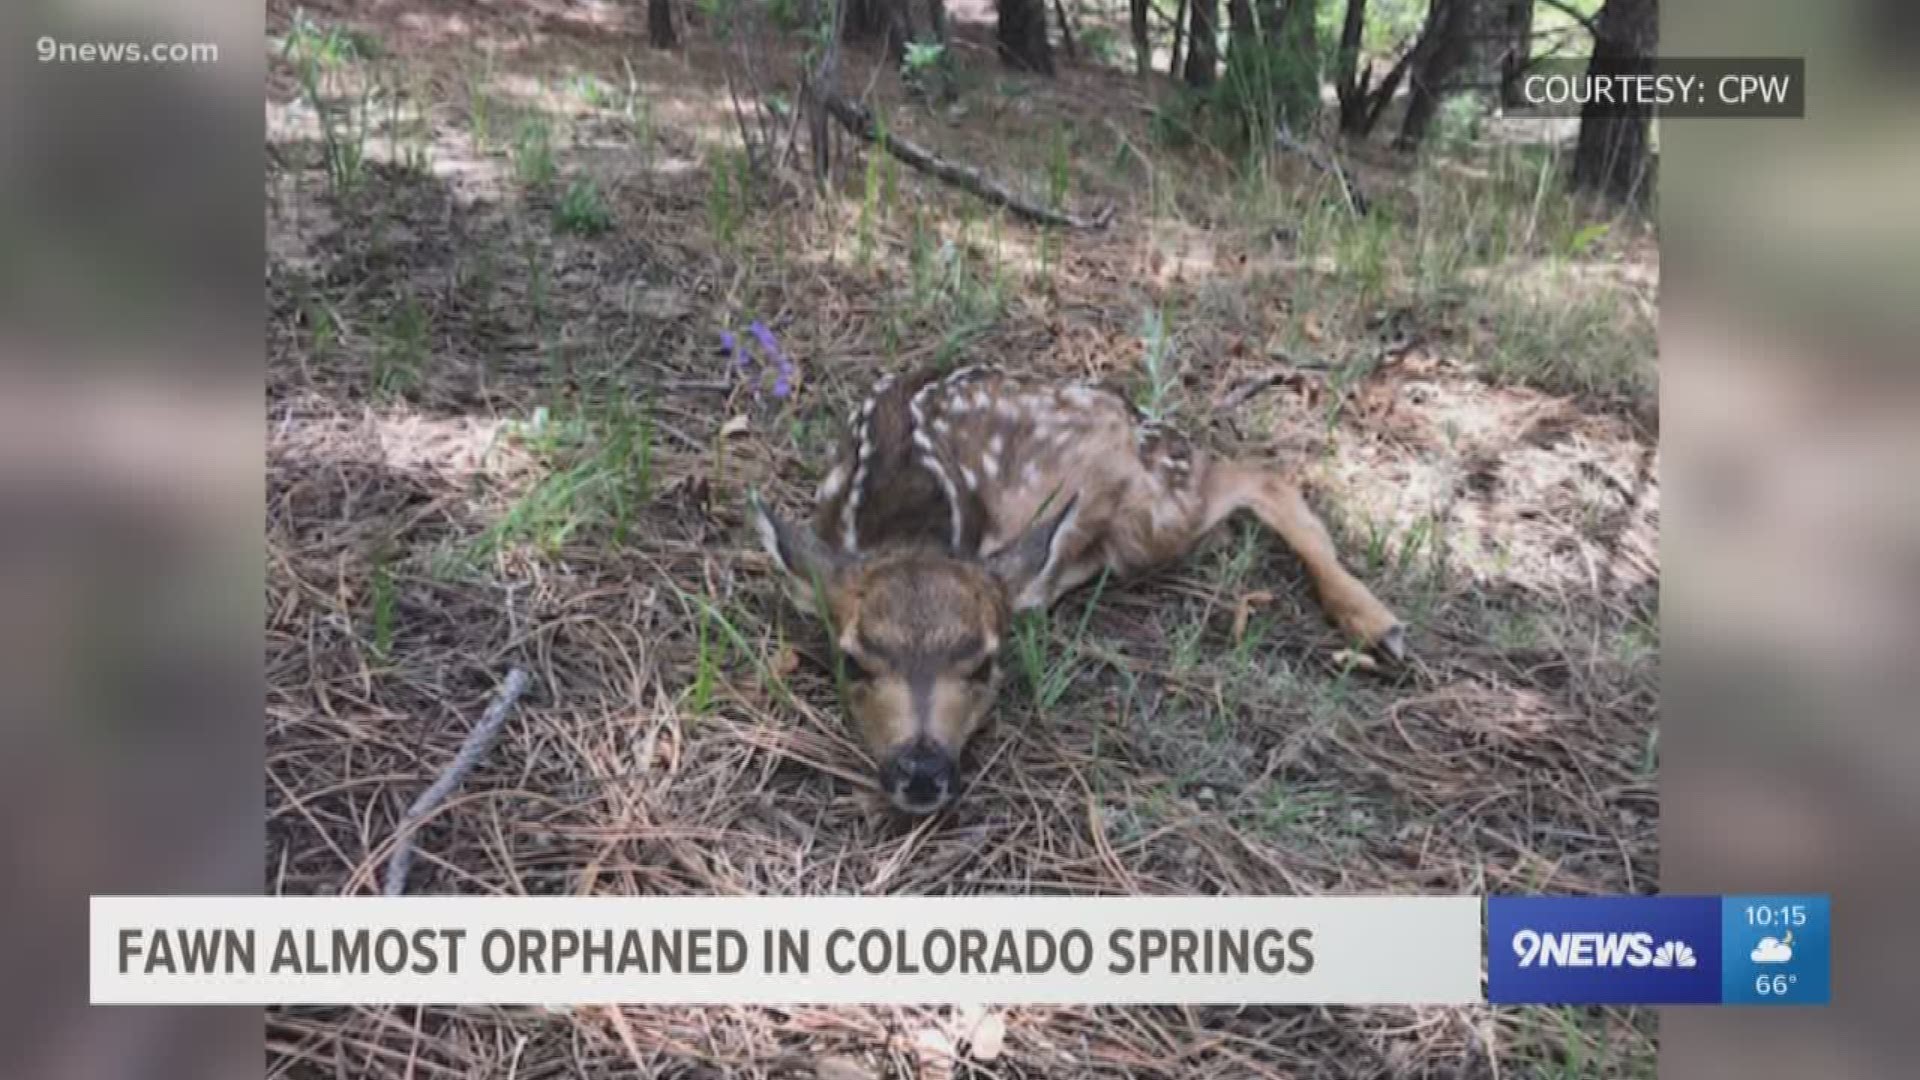 On Thursday, CPW was able to reunite a fawn with its mother after someone in Colorado Springs wouldn't leave it alone.